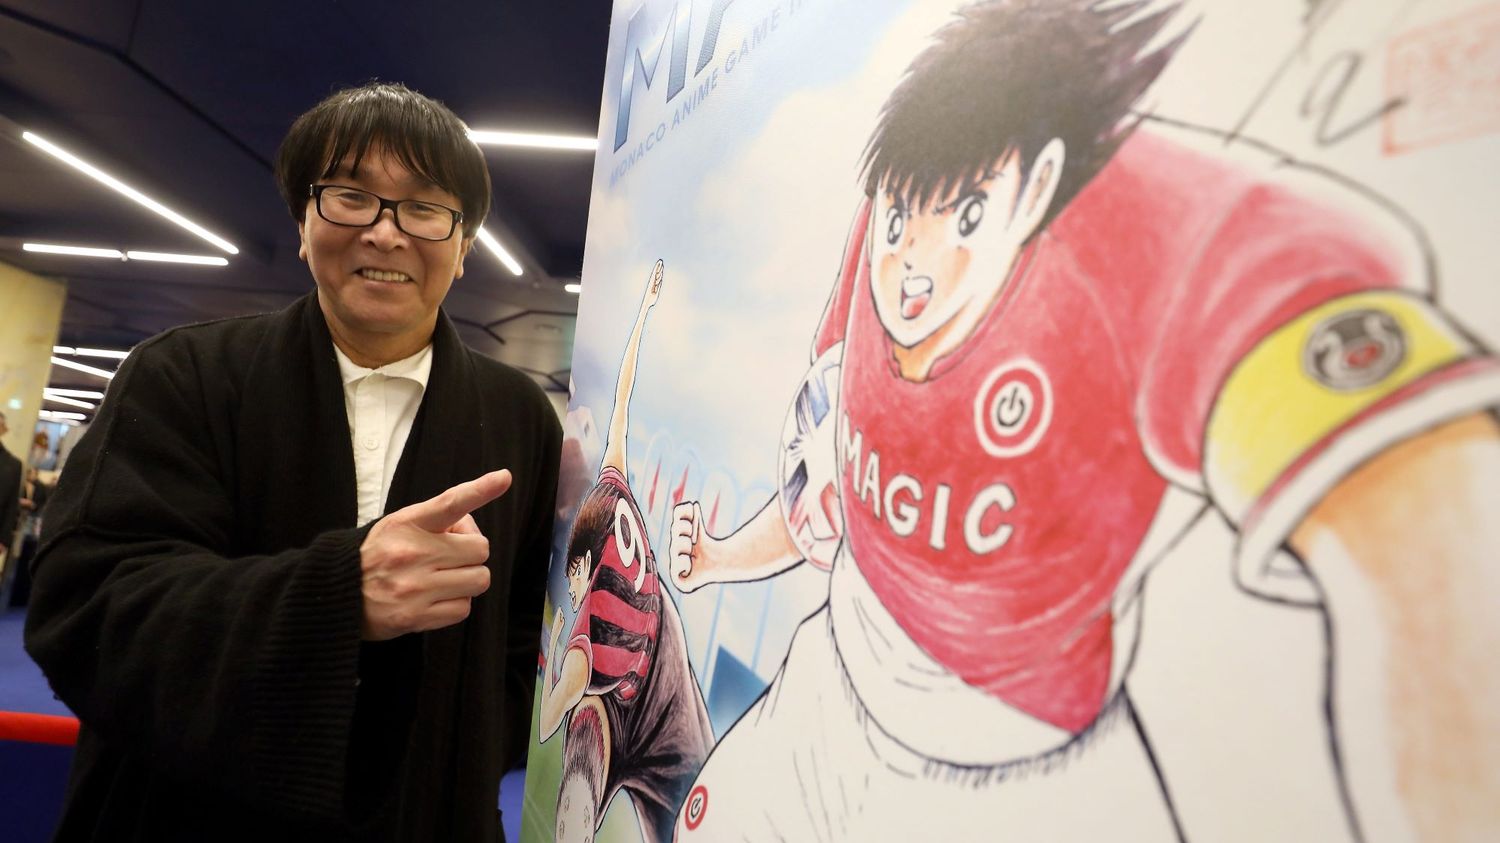 The manga "Captain Tsubasa", better known as "Olive and Tom", is ending, but its author wants to continue